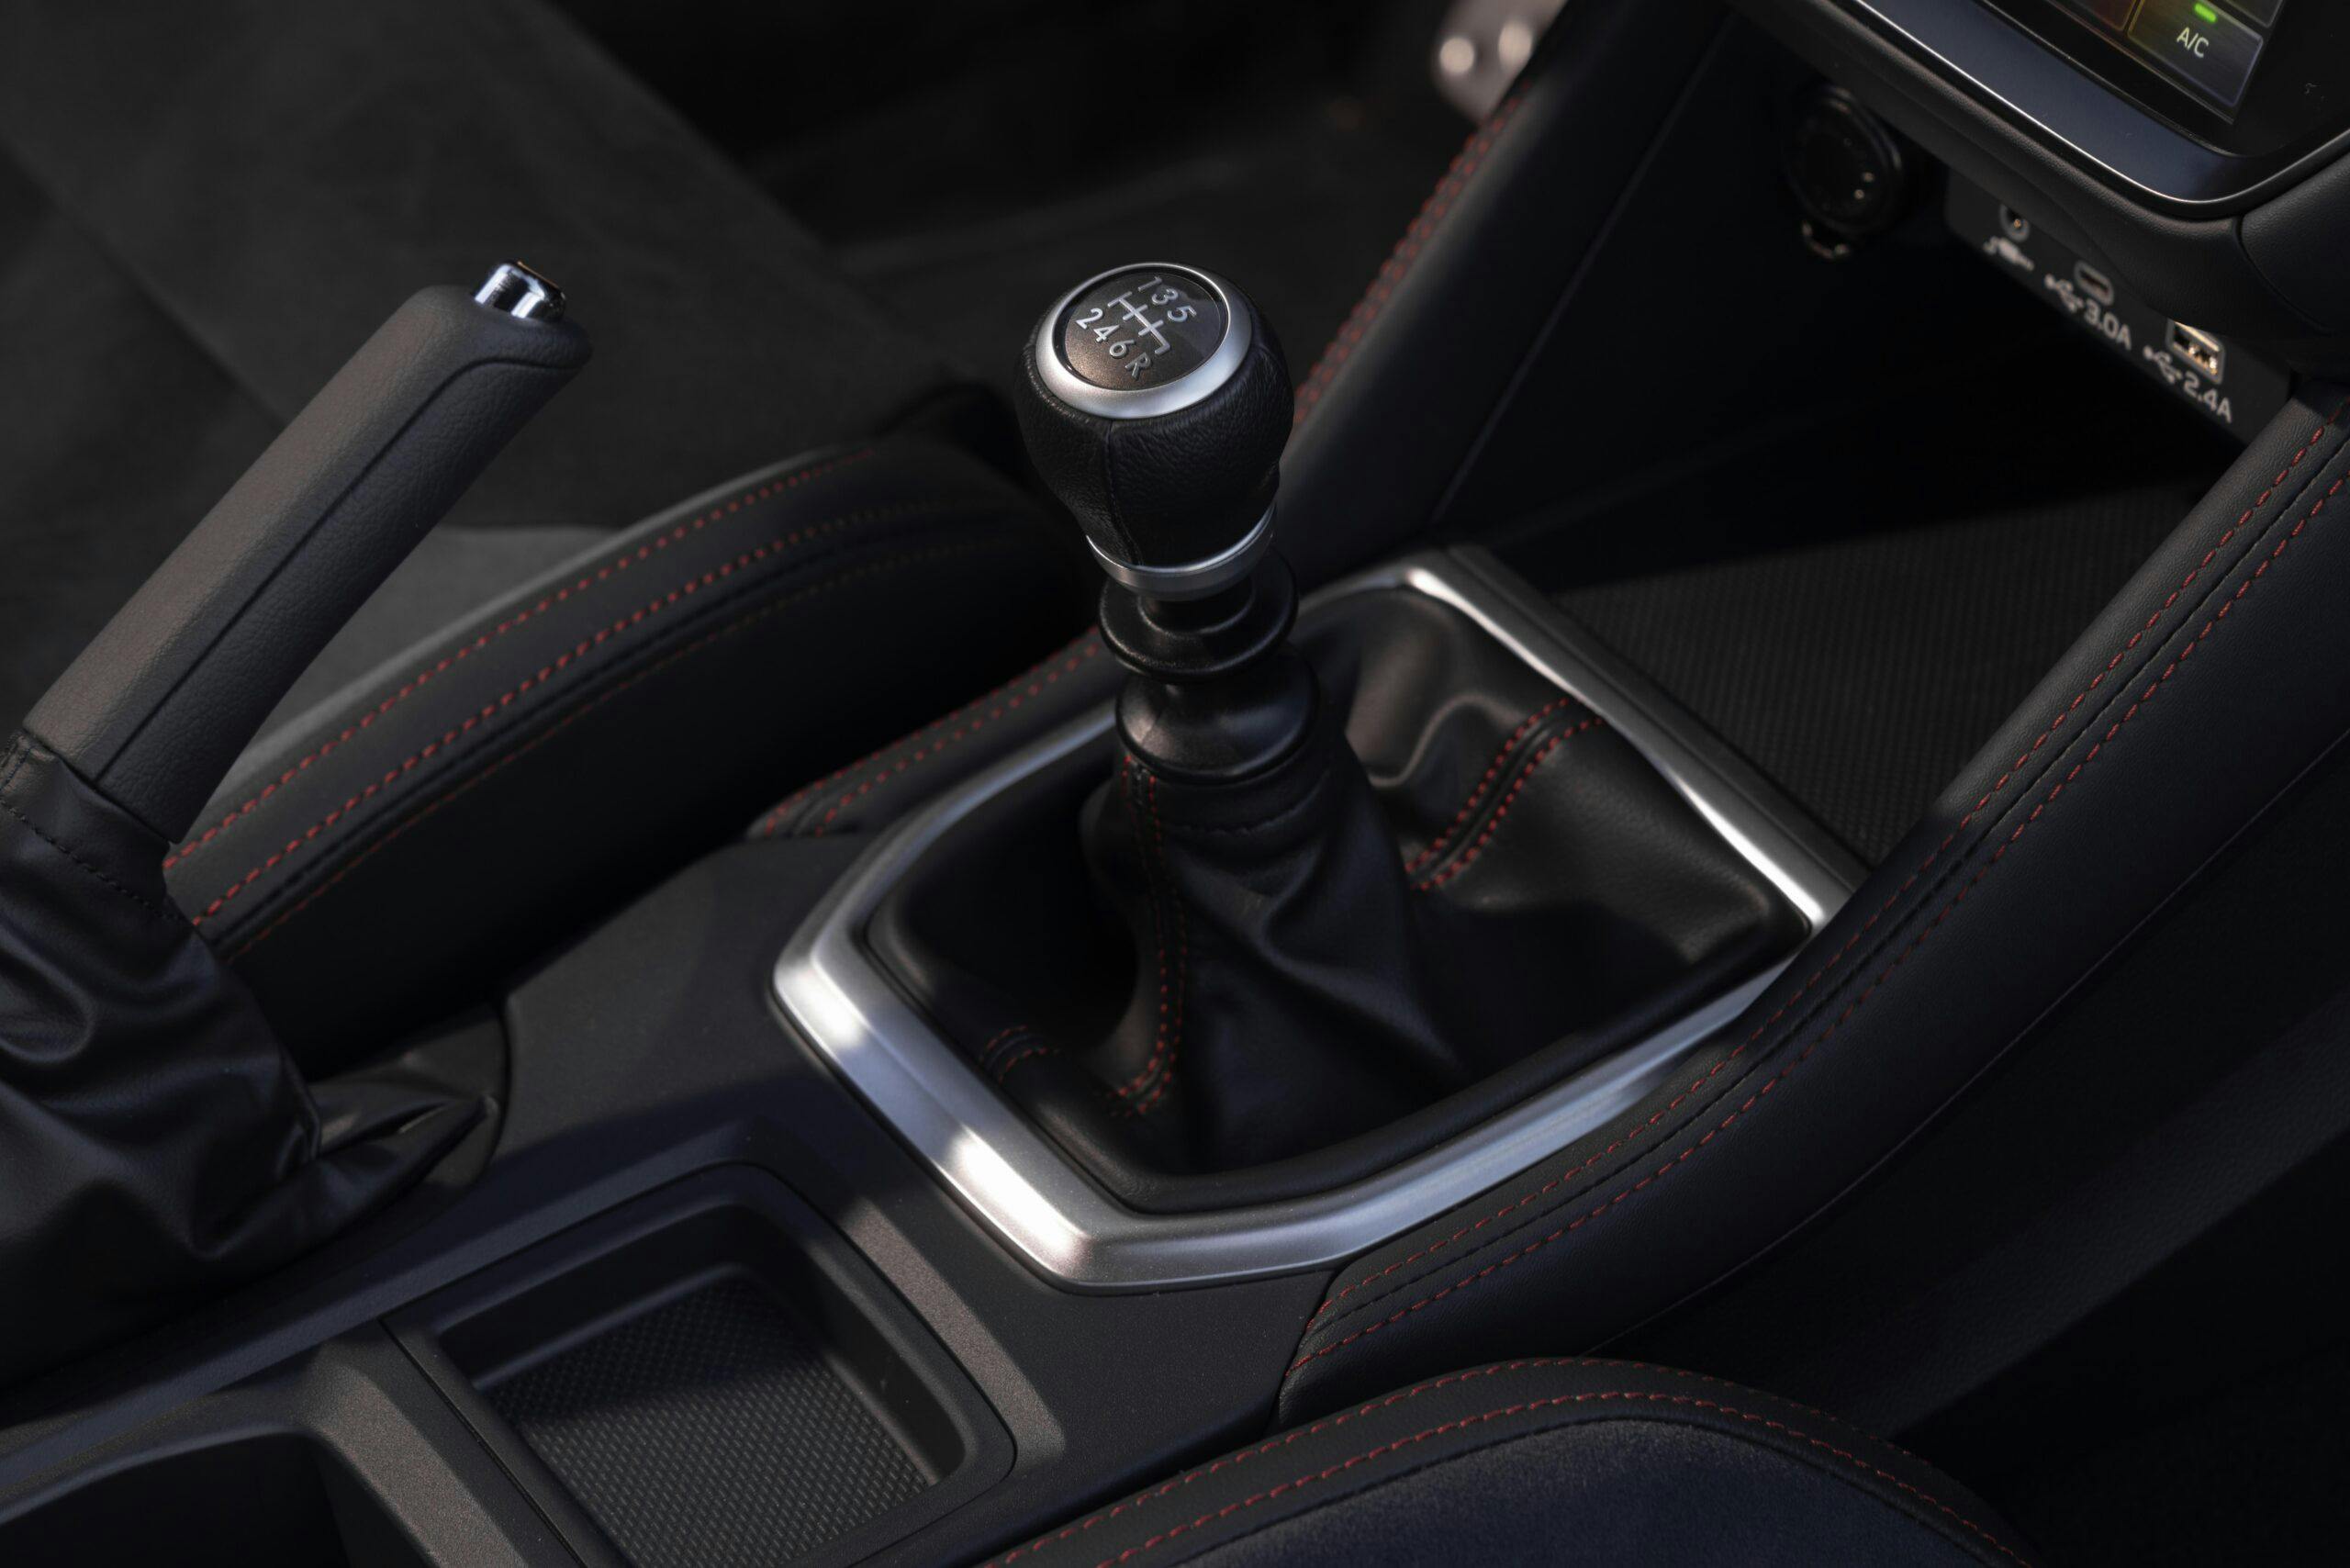 Manuals matter - which exotic cars have the biggest stick-shift premium? -  Hagerty Media